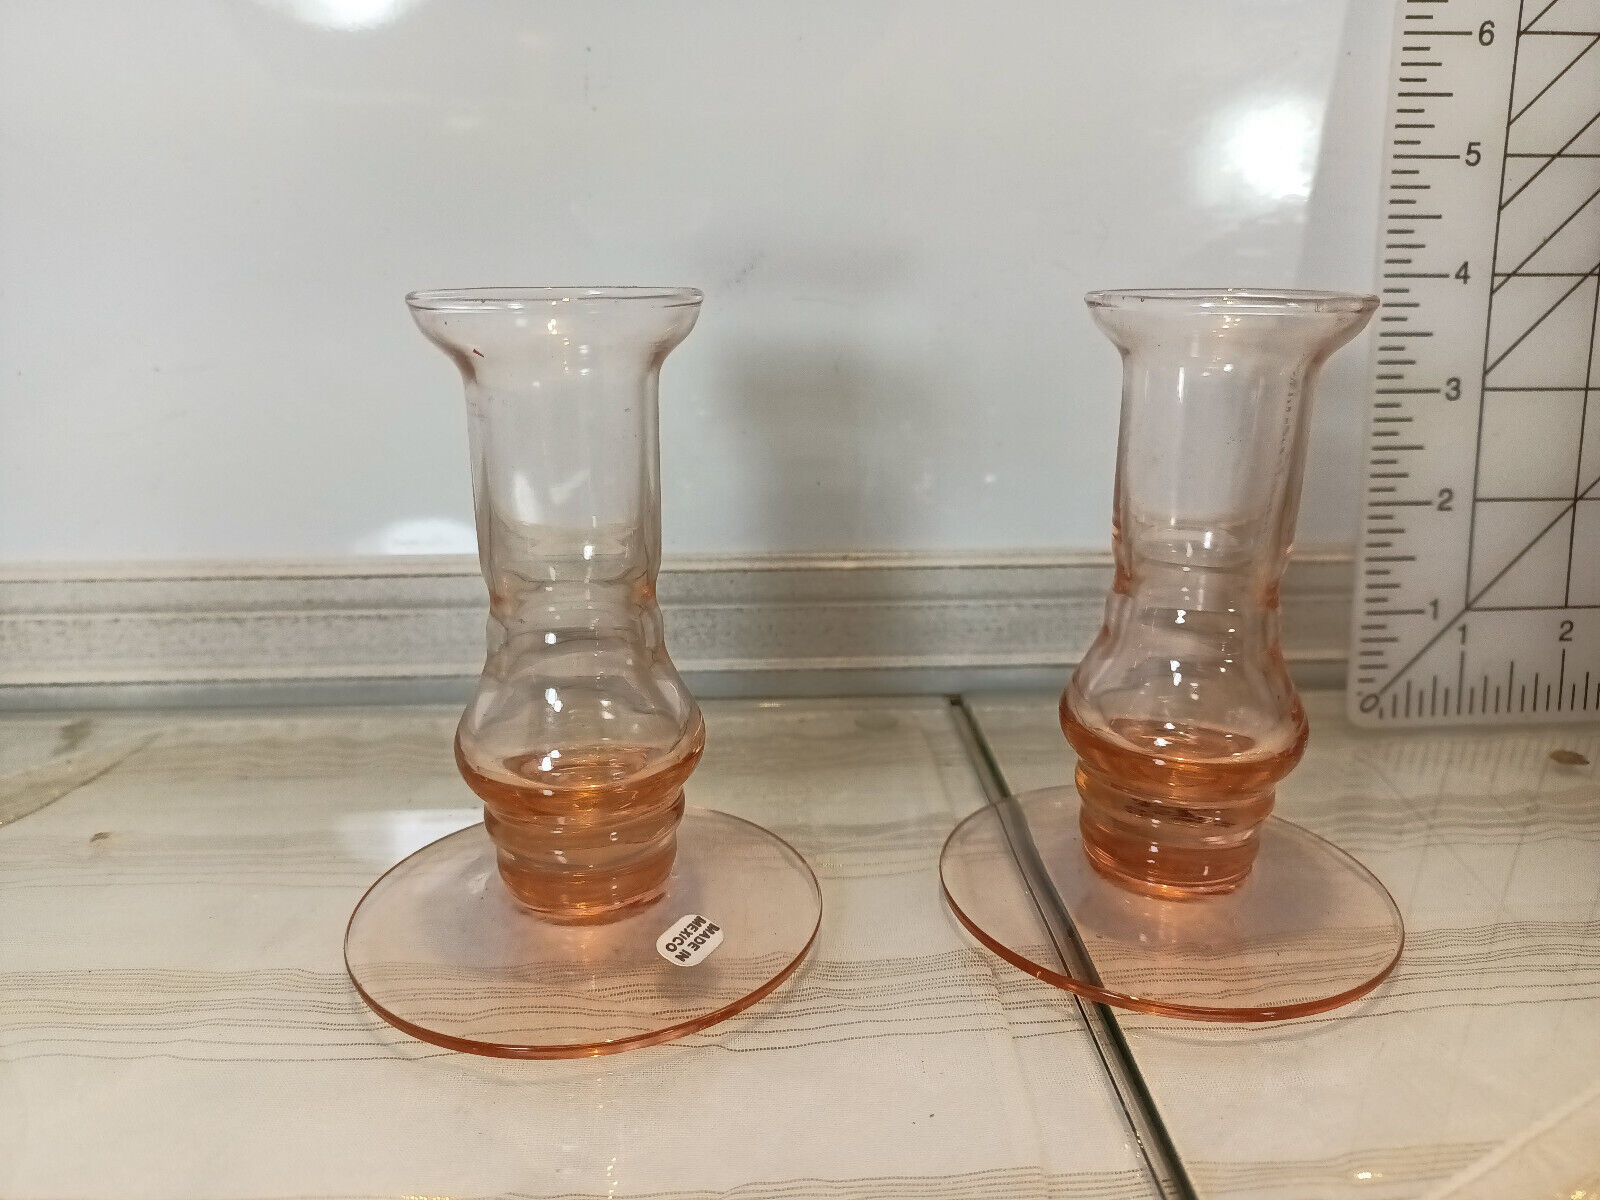 Vitnage Pair of Hand Blown Peach Glass Taper Candlesticks Candle Holders